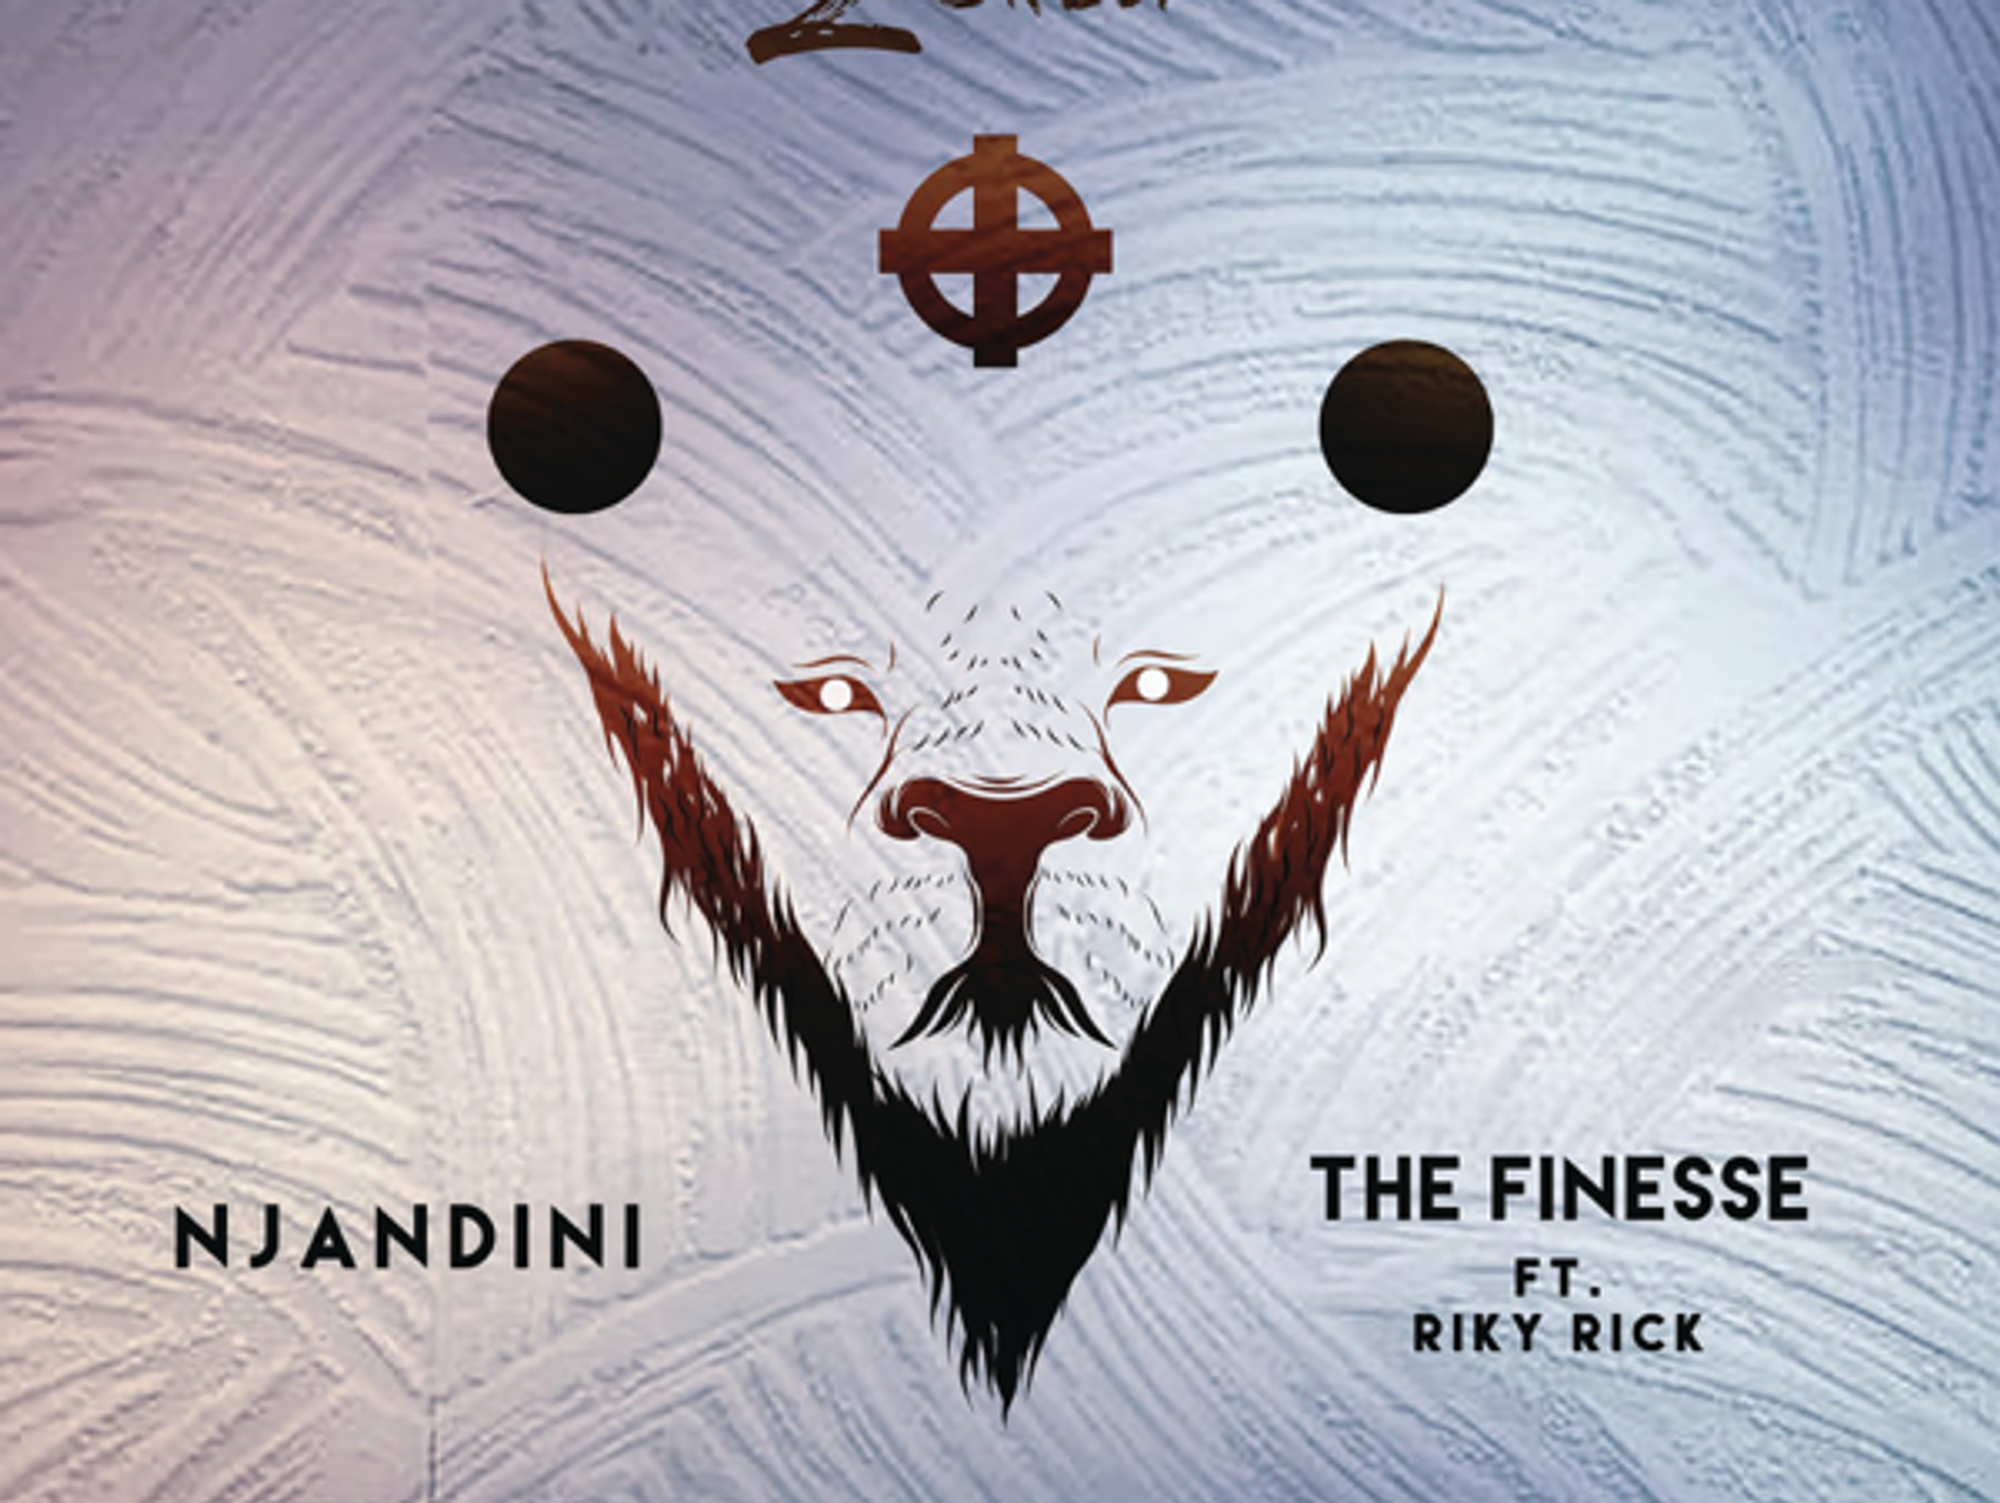 Kwesta Shares 2 New Singles ‘Njandini’ and ‘The Finesse’ Featuring Riky Rick